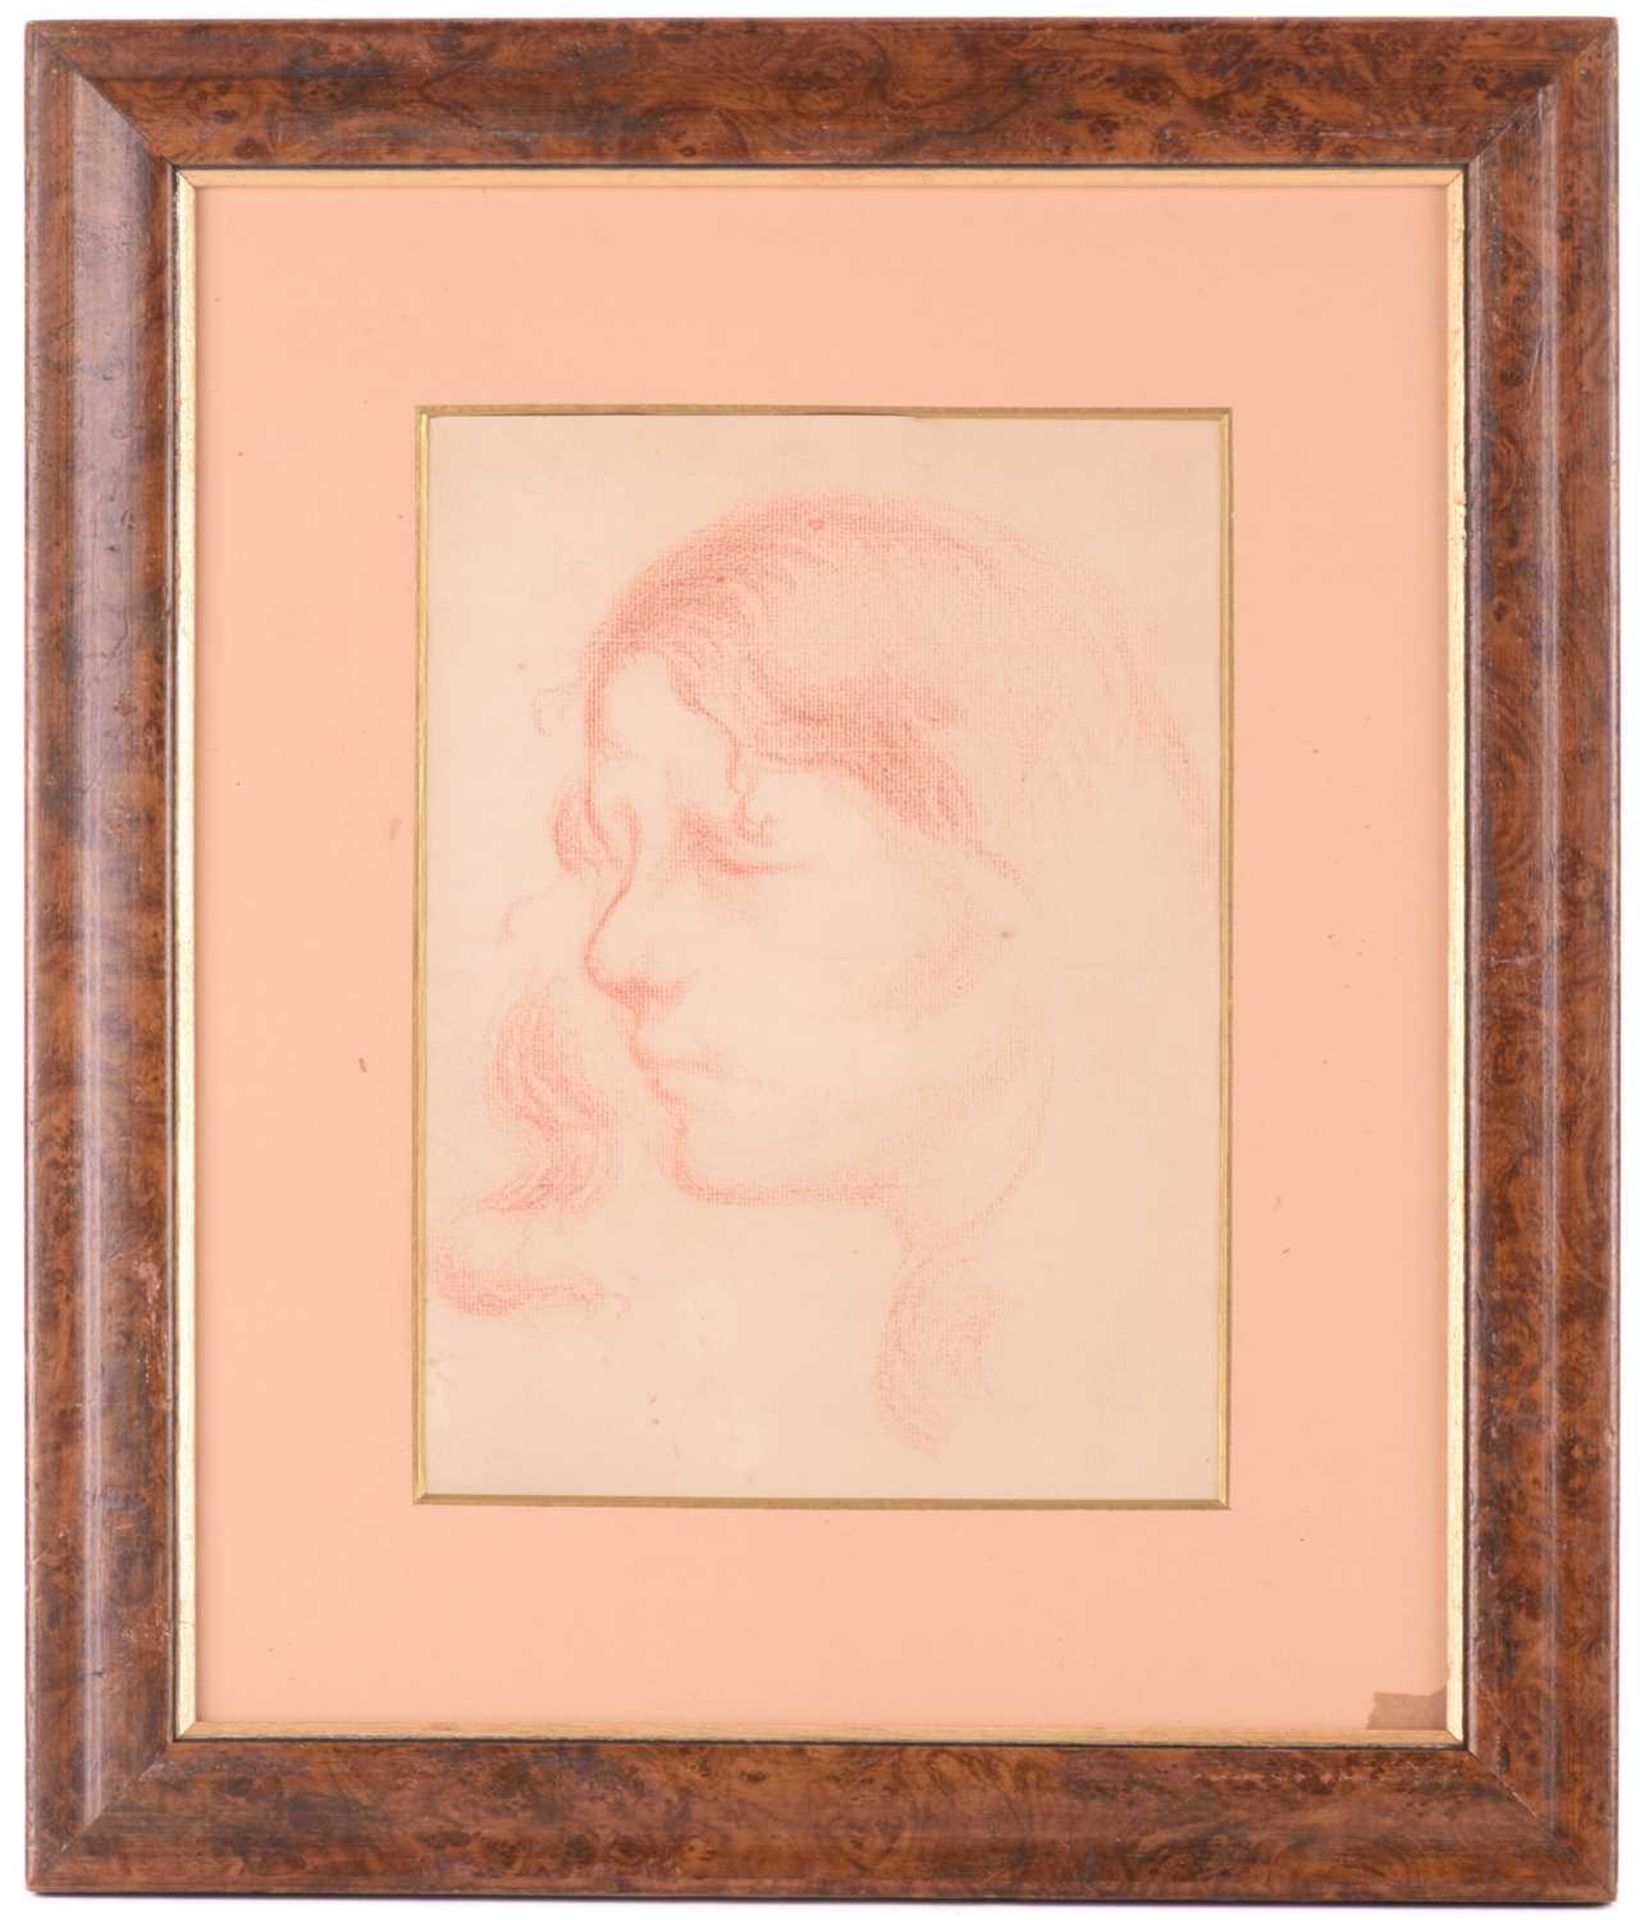 Eugene Carriere (1849 - 1906), Study of a girl, red chalk on laid paper, ink stamp verso, 28.5 x